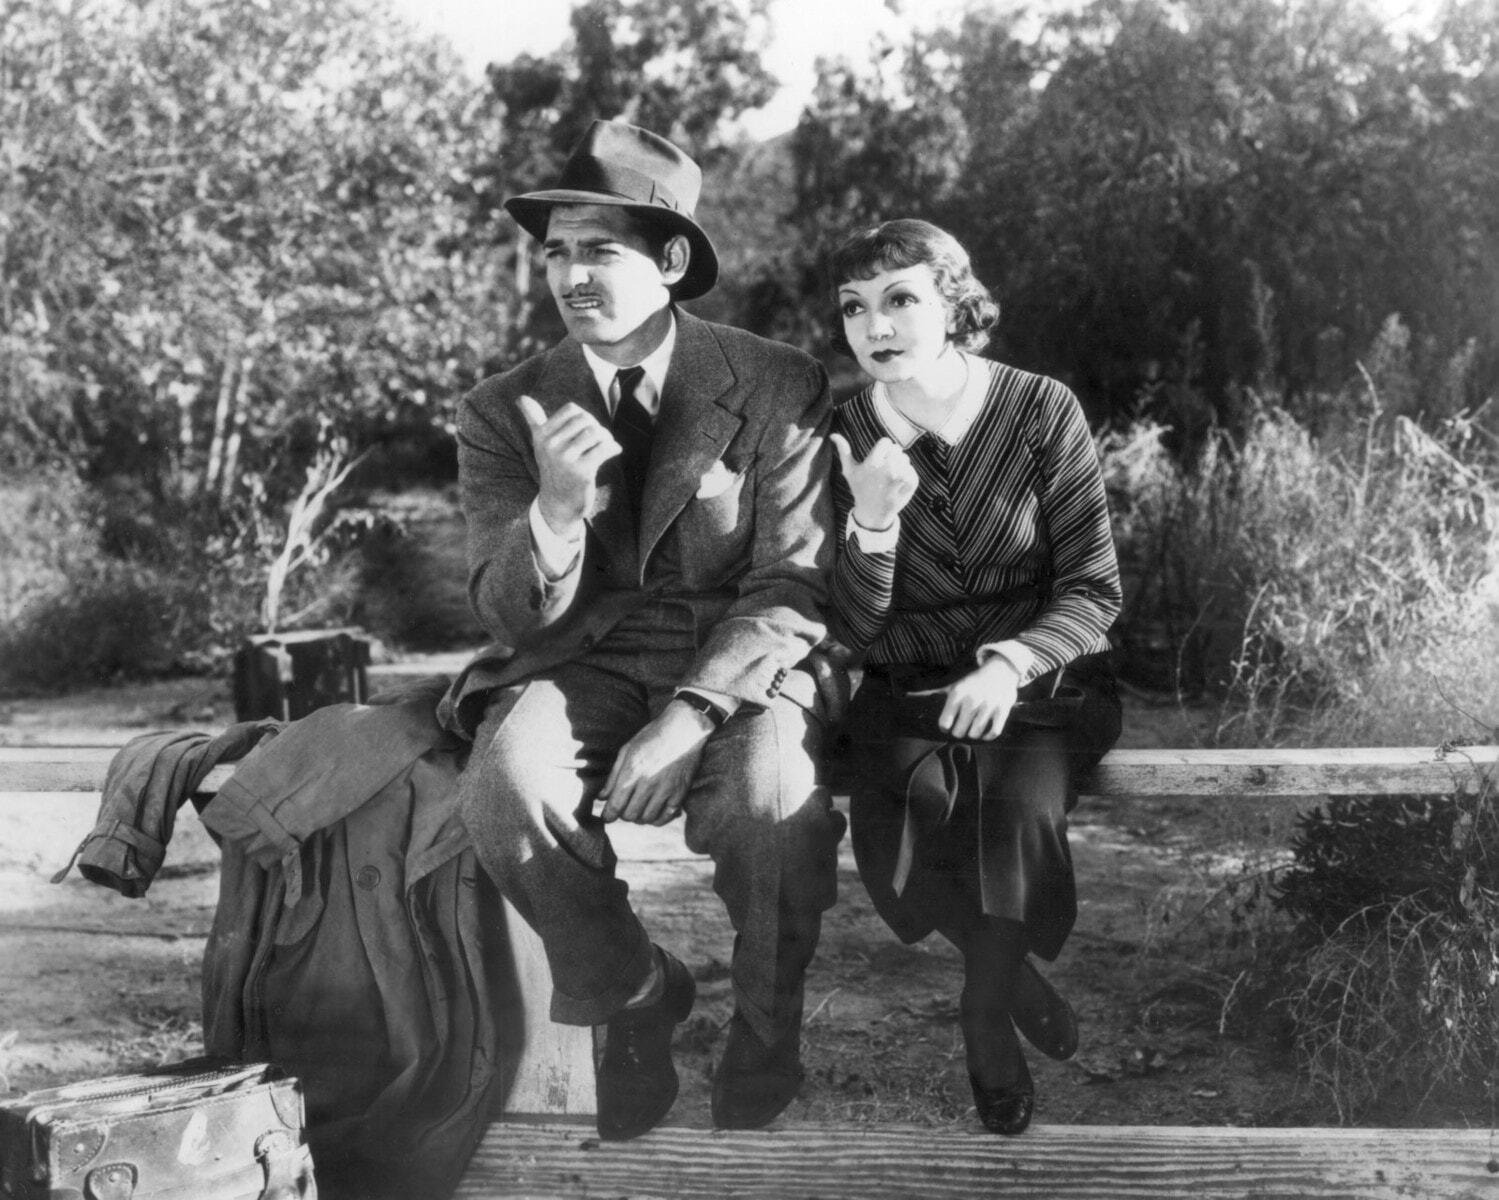 <p>One of the first road trip movies of all time, <a href="https://www.imdb.com/title/tt0025316/">this 1934 classic</a> starring Clark Gable and Claudette Colbert is famous for its iconic <a href="https://www.youtube.com/watch?v=Ar-hnj5Zsk4&ab_channel=Movieclips">ankle flaunting scene</a> that has been parodied an endless amount of times. It’s widely considered to be one of the greatest films ever, as the rom-com is filled with endless comedic moments as the pair venture out to New York. It was also one of the last movies released before the Motion Picture Association began stricter enforcement of the <a href="https://daily.jstor.org/end-american-film-censorship/">Motion Picture Production Code</a>, which severely limited what films could show for nearly three decades.</p>